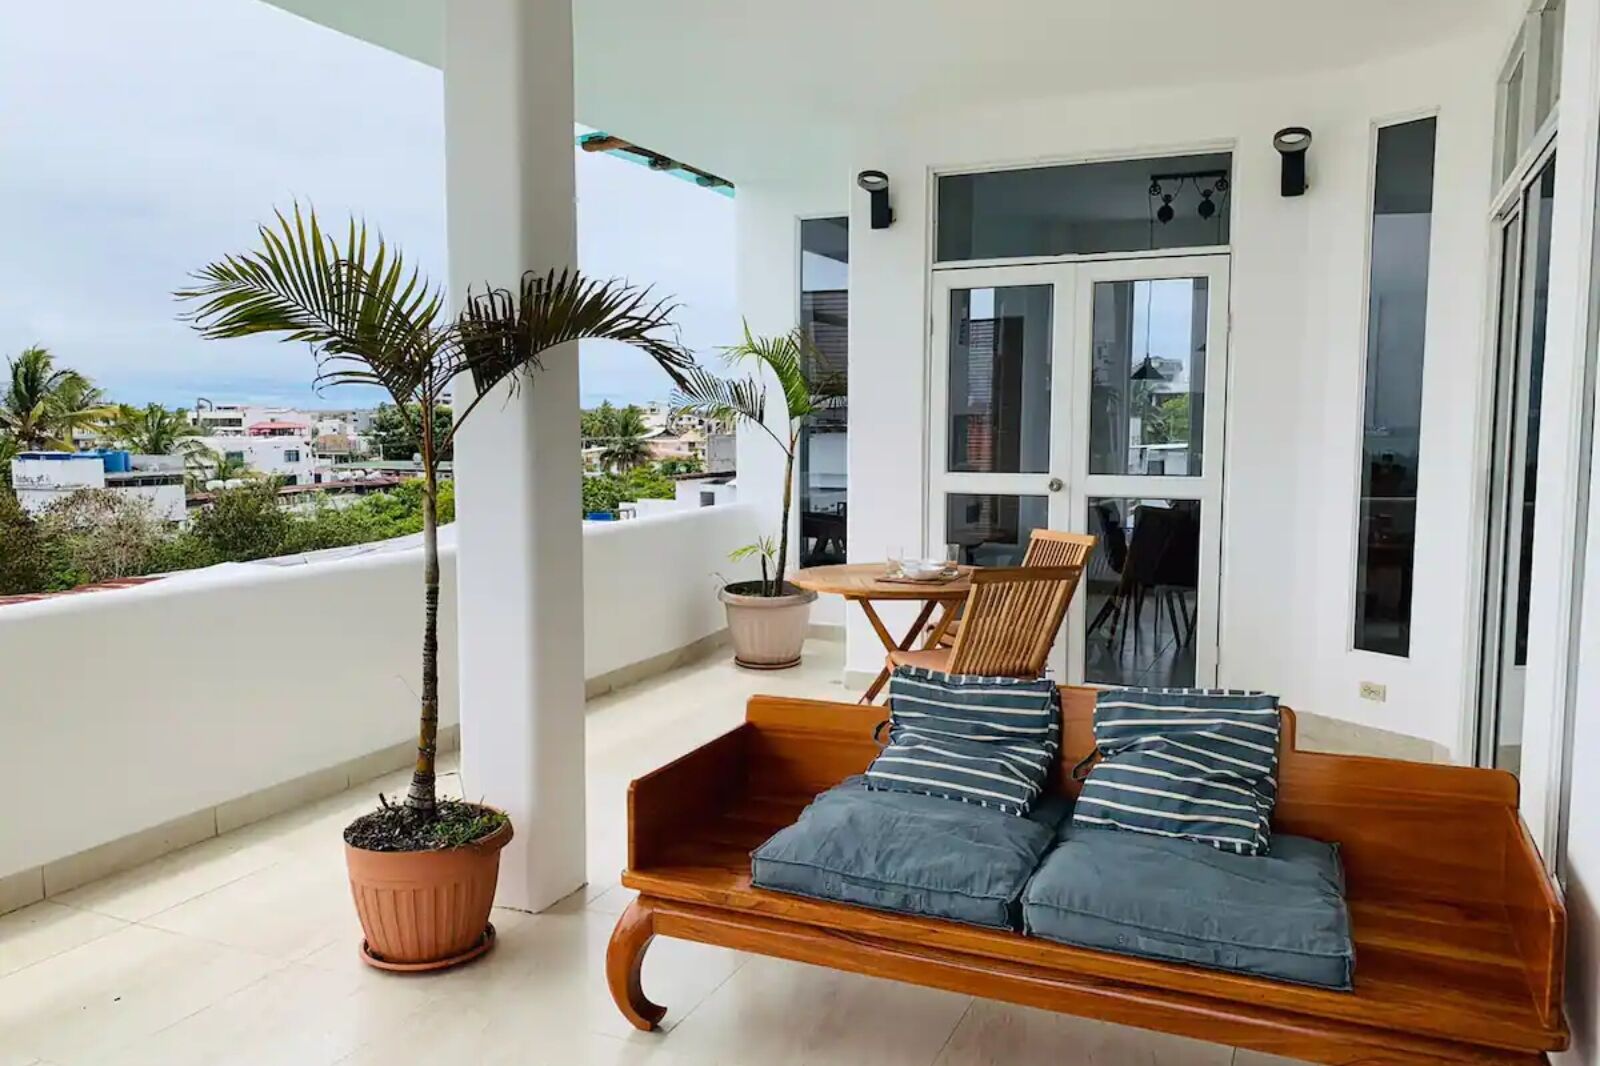 Balcony in Airbnb Galapagos rental